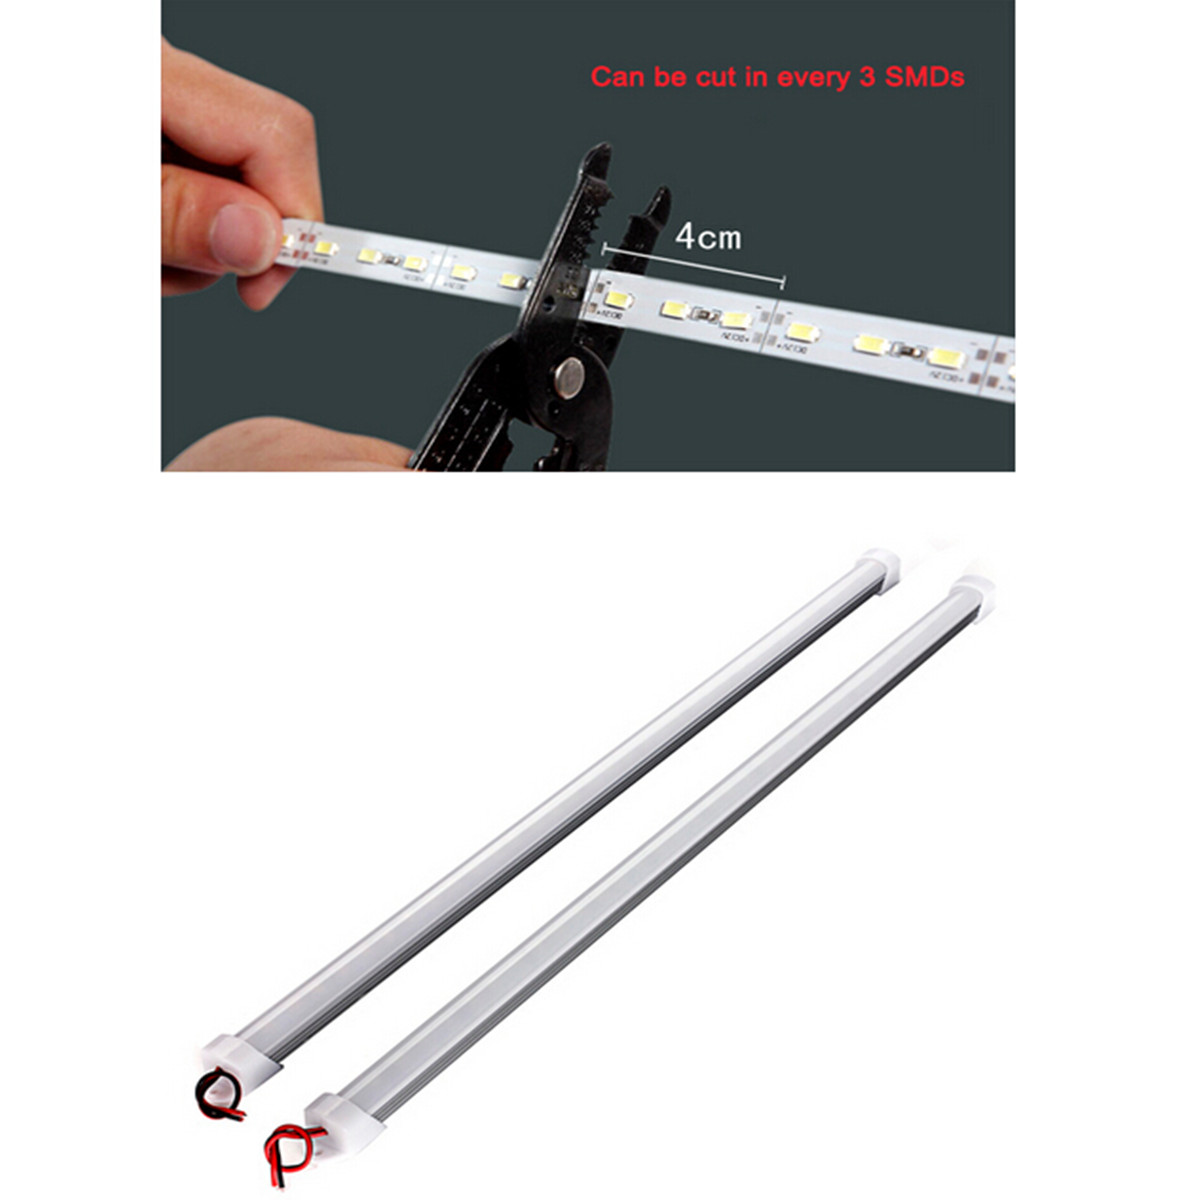 50CM-64W-5630-SMD-Pure-White-Warm-White-Waterproof-Hard-LED-Rigid-Strip-Bar-Light-With-Cover-DC12V-1283576-7